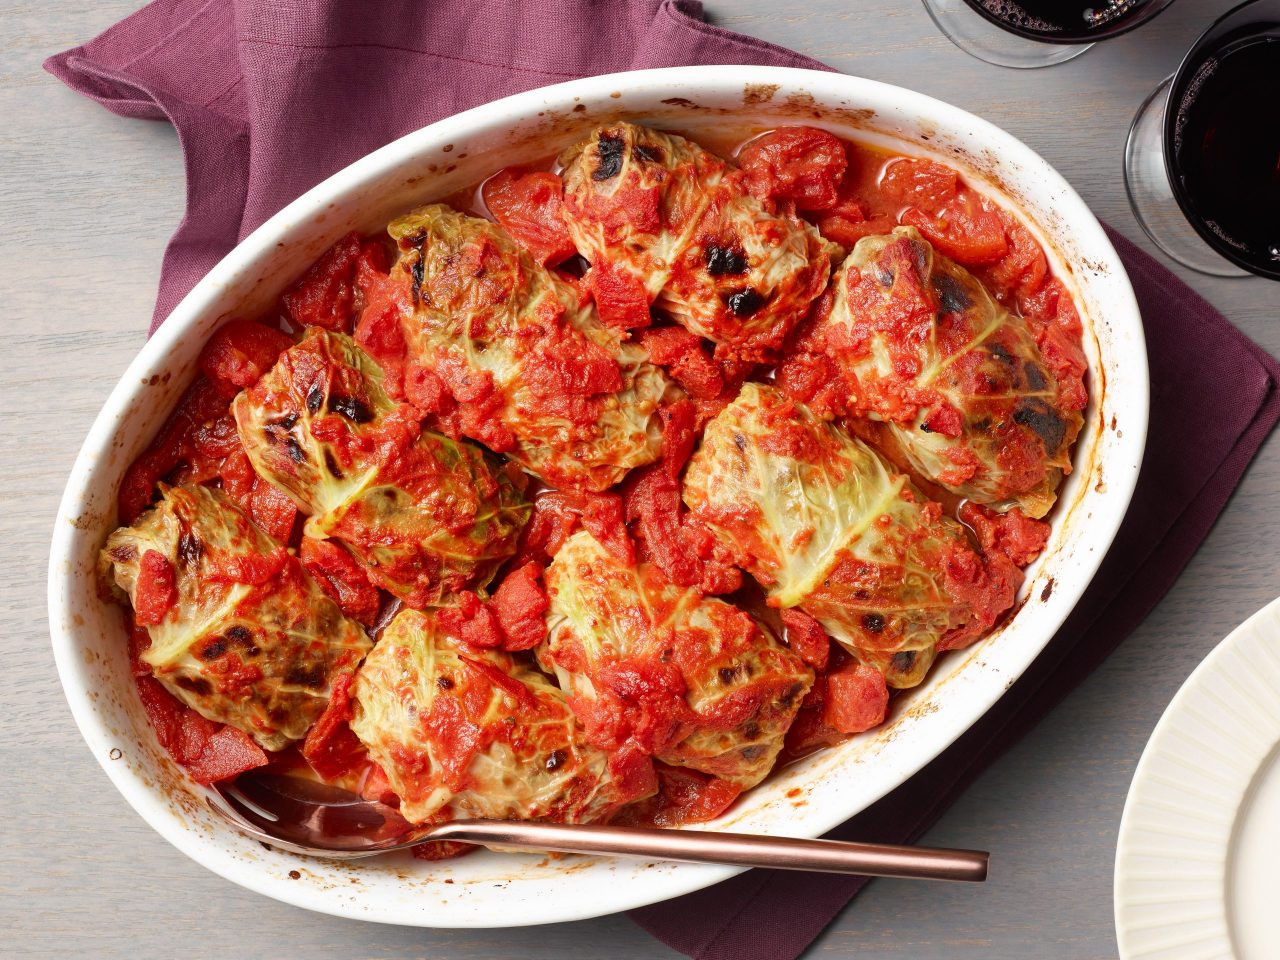 Food Network Kitchen’s Stuffed Cabbage with Tomato Sauce, as seen on Food Network.